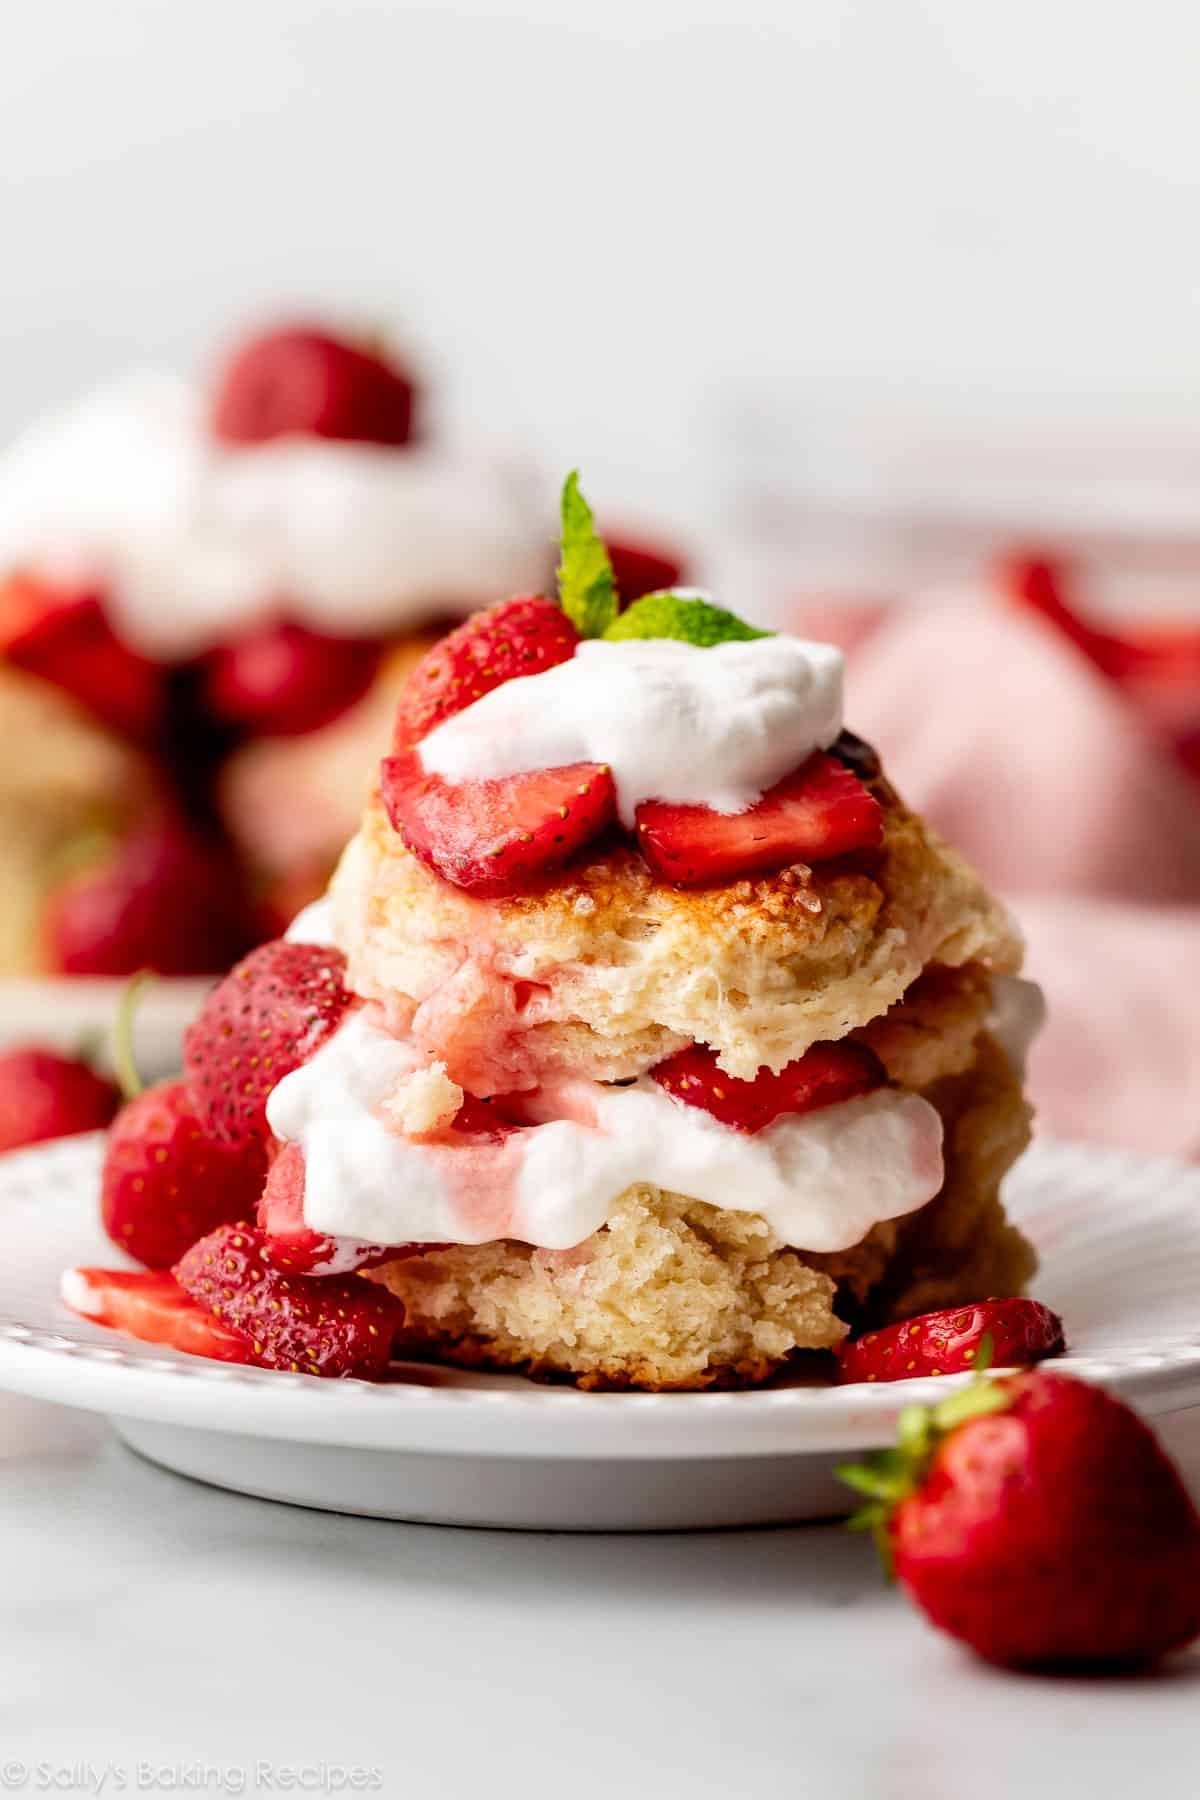 strawberry shortcake with fresh strawberries, homemade biscuits, and whipped cream on white plate.